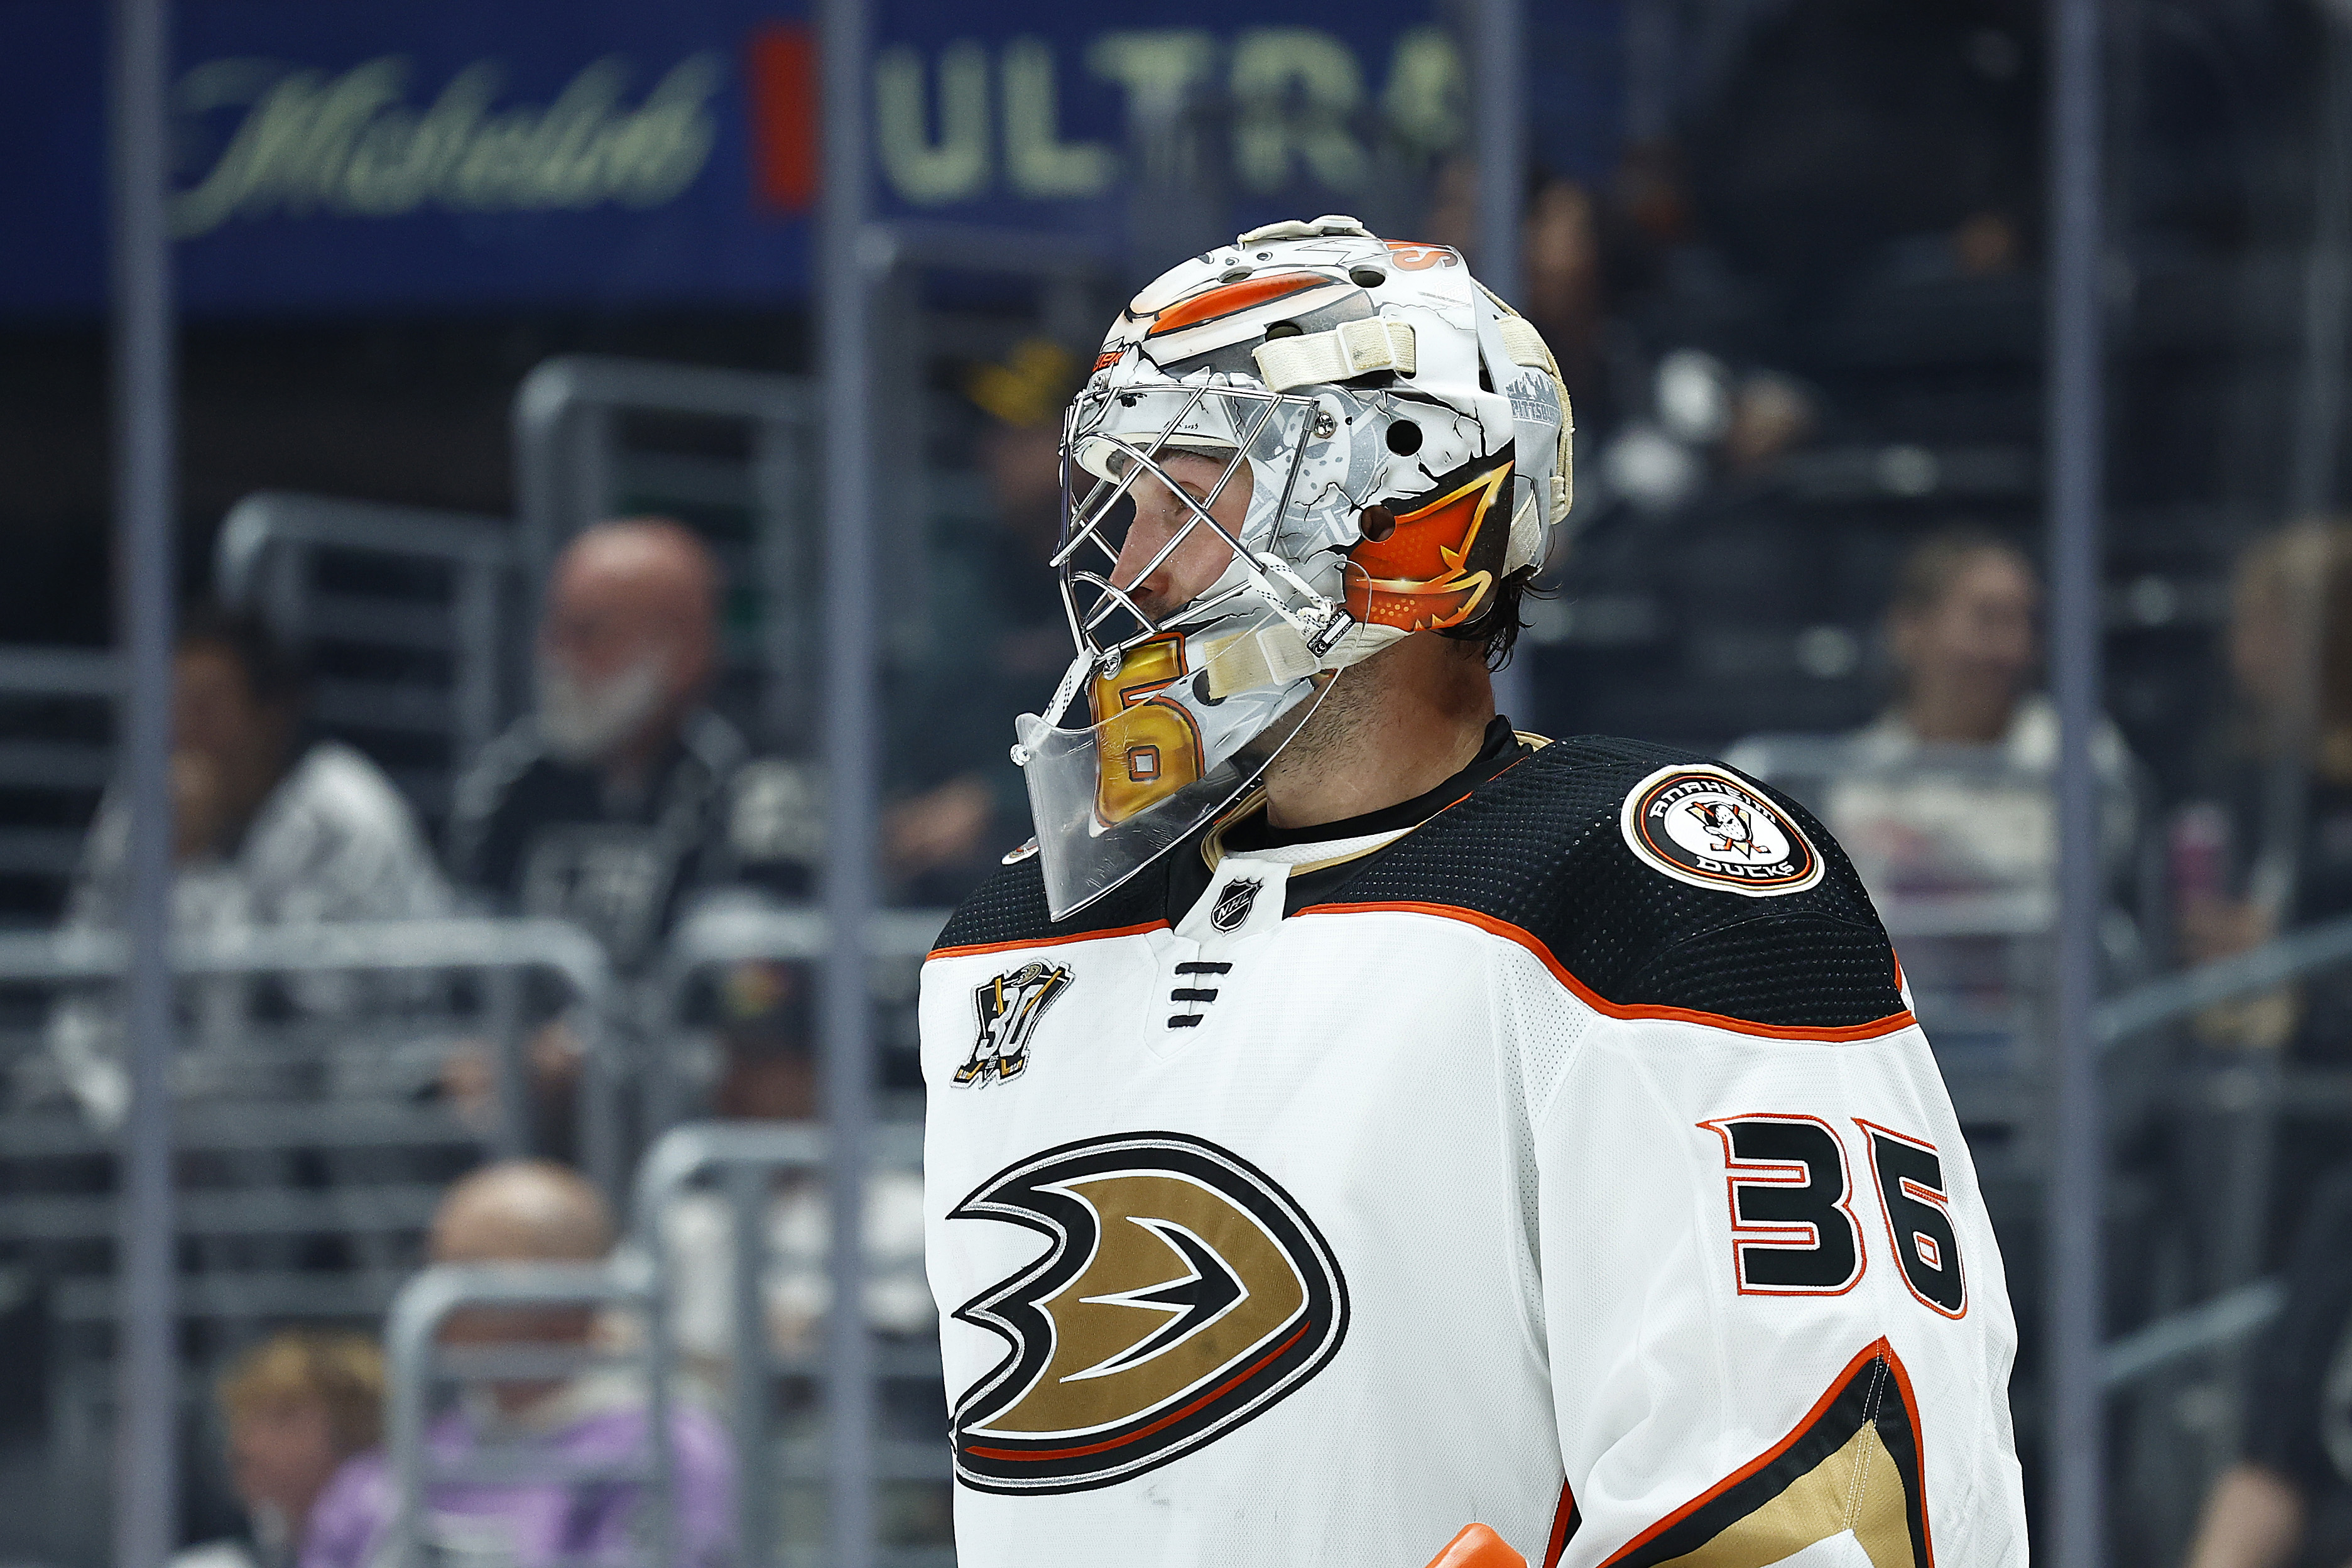 No longer wanted in Anaheim, Corey Perry brings extra motivation